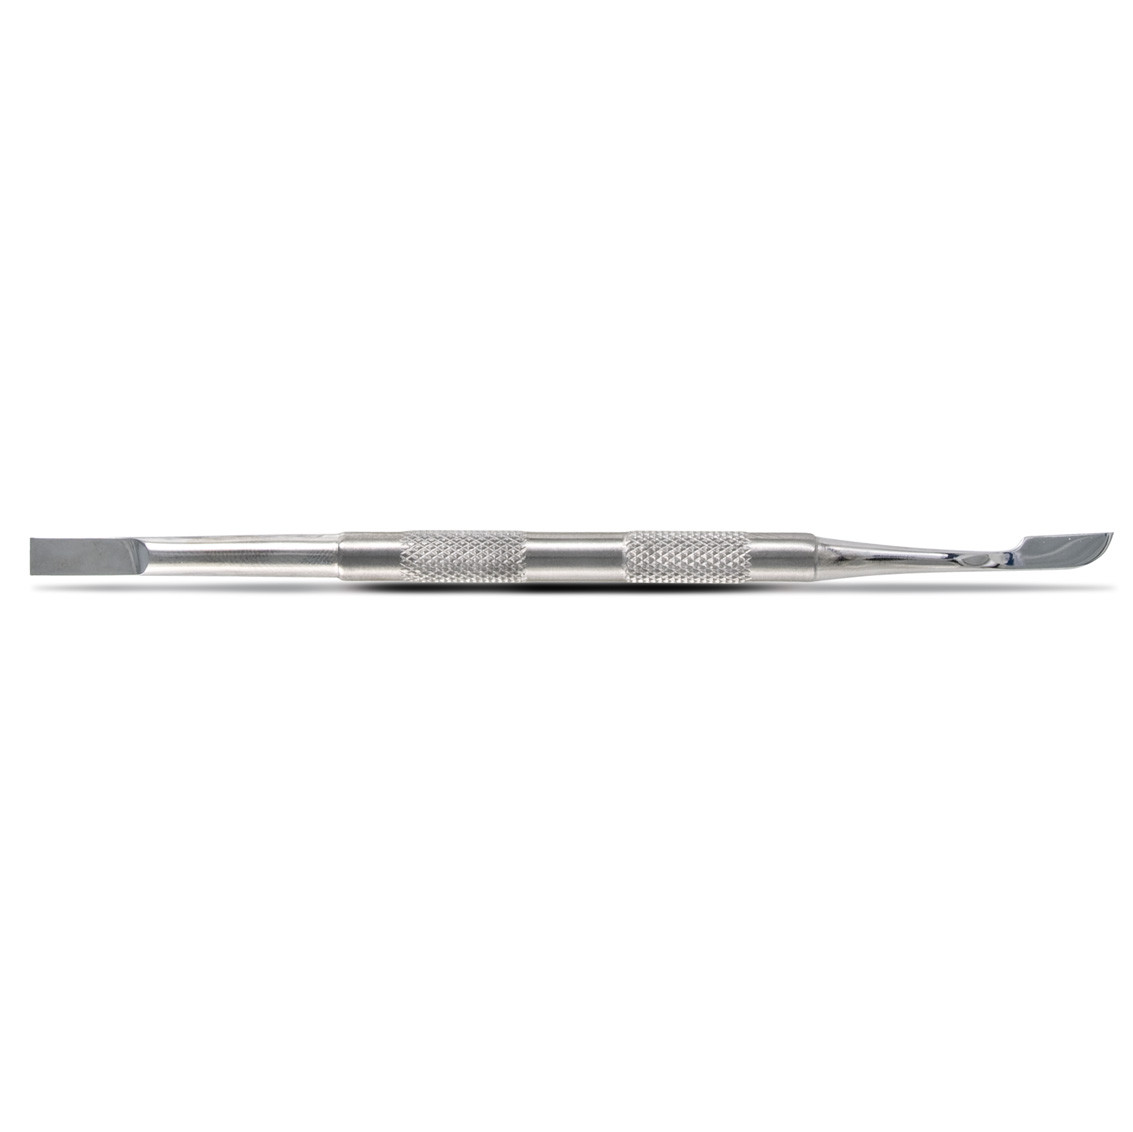 Professional stainless steel cuticle pusher with double flat, rectangular and lance-shaped tip